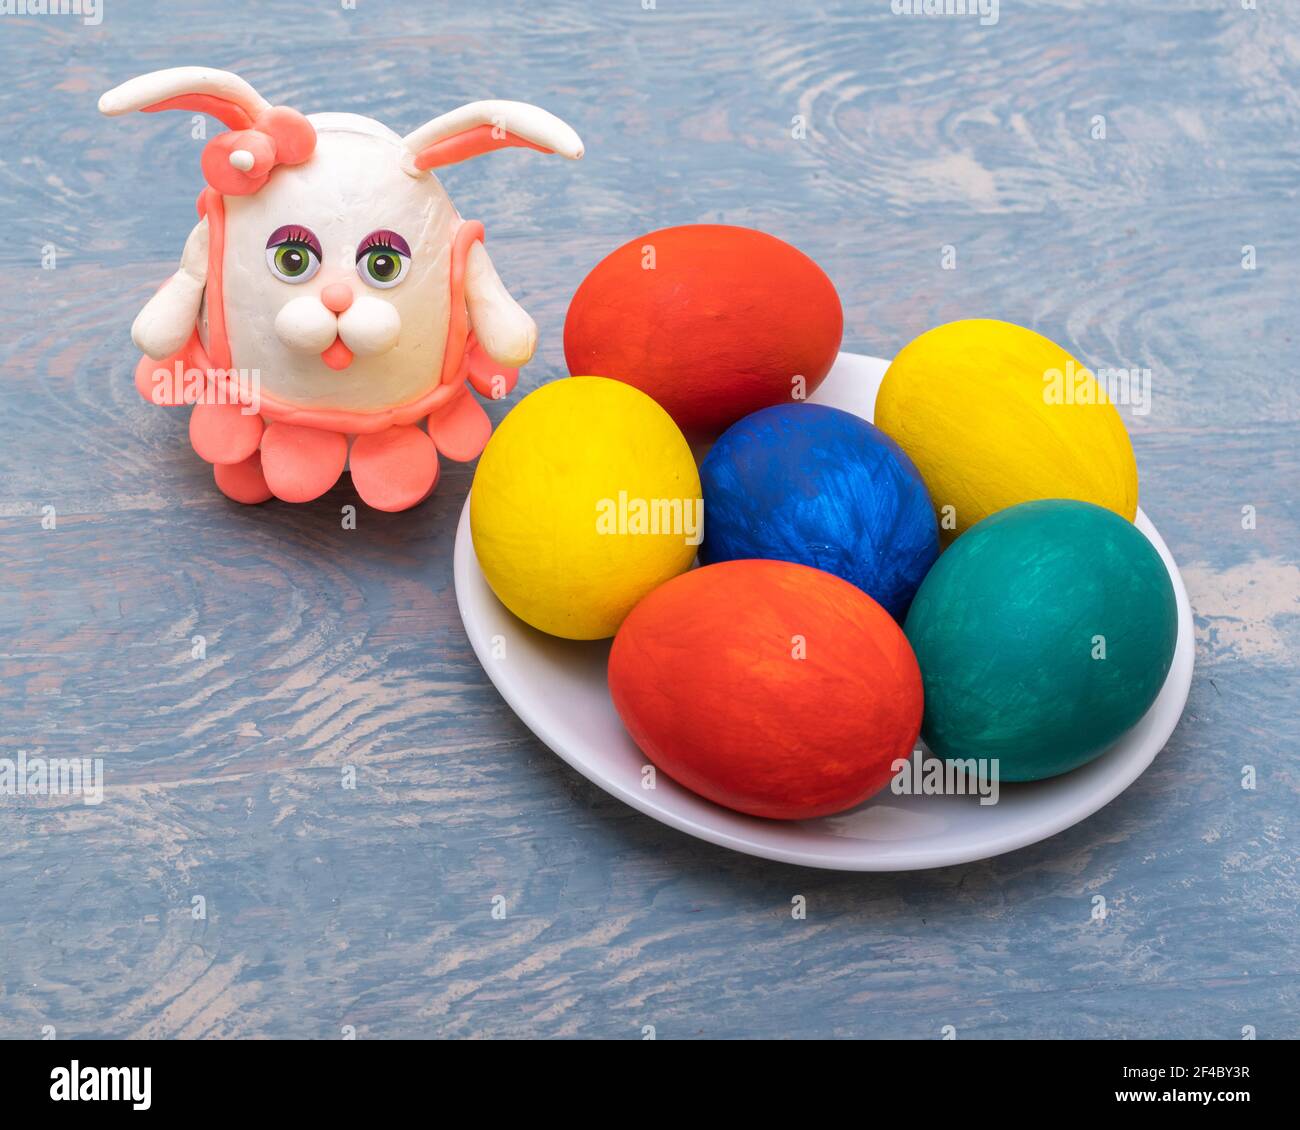 Happy Easter concept. Hand-painted Easter eggs and a hand-made ...